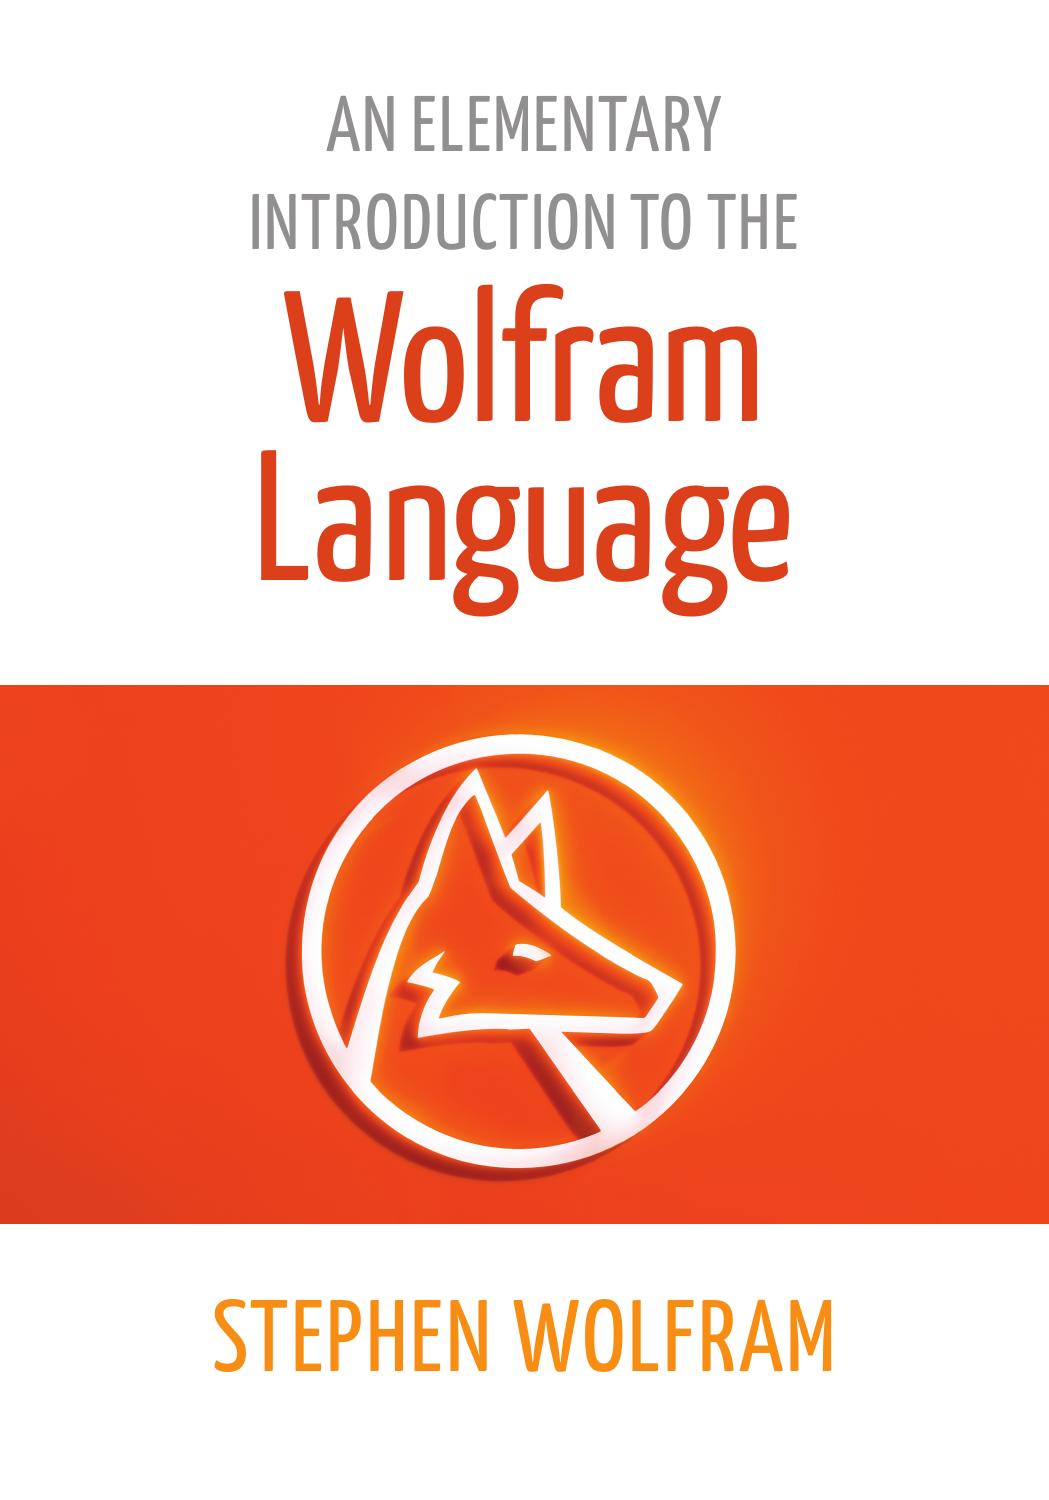 An Elementary Introduction to the Wolfram Language - 2016